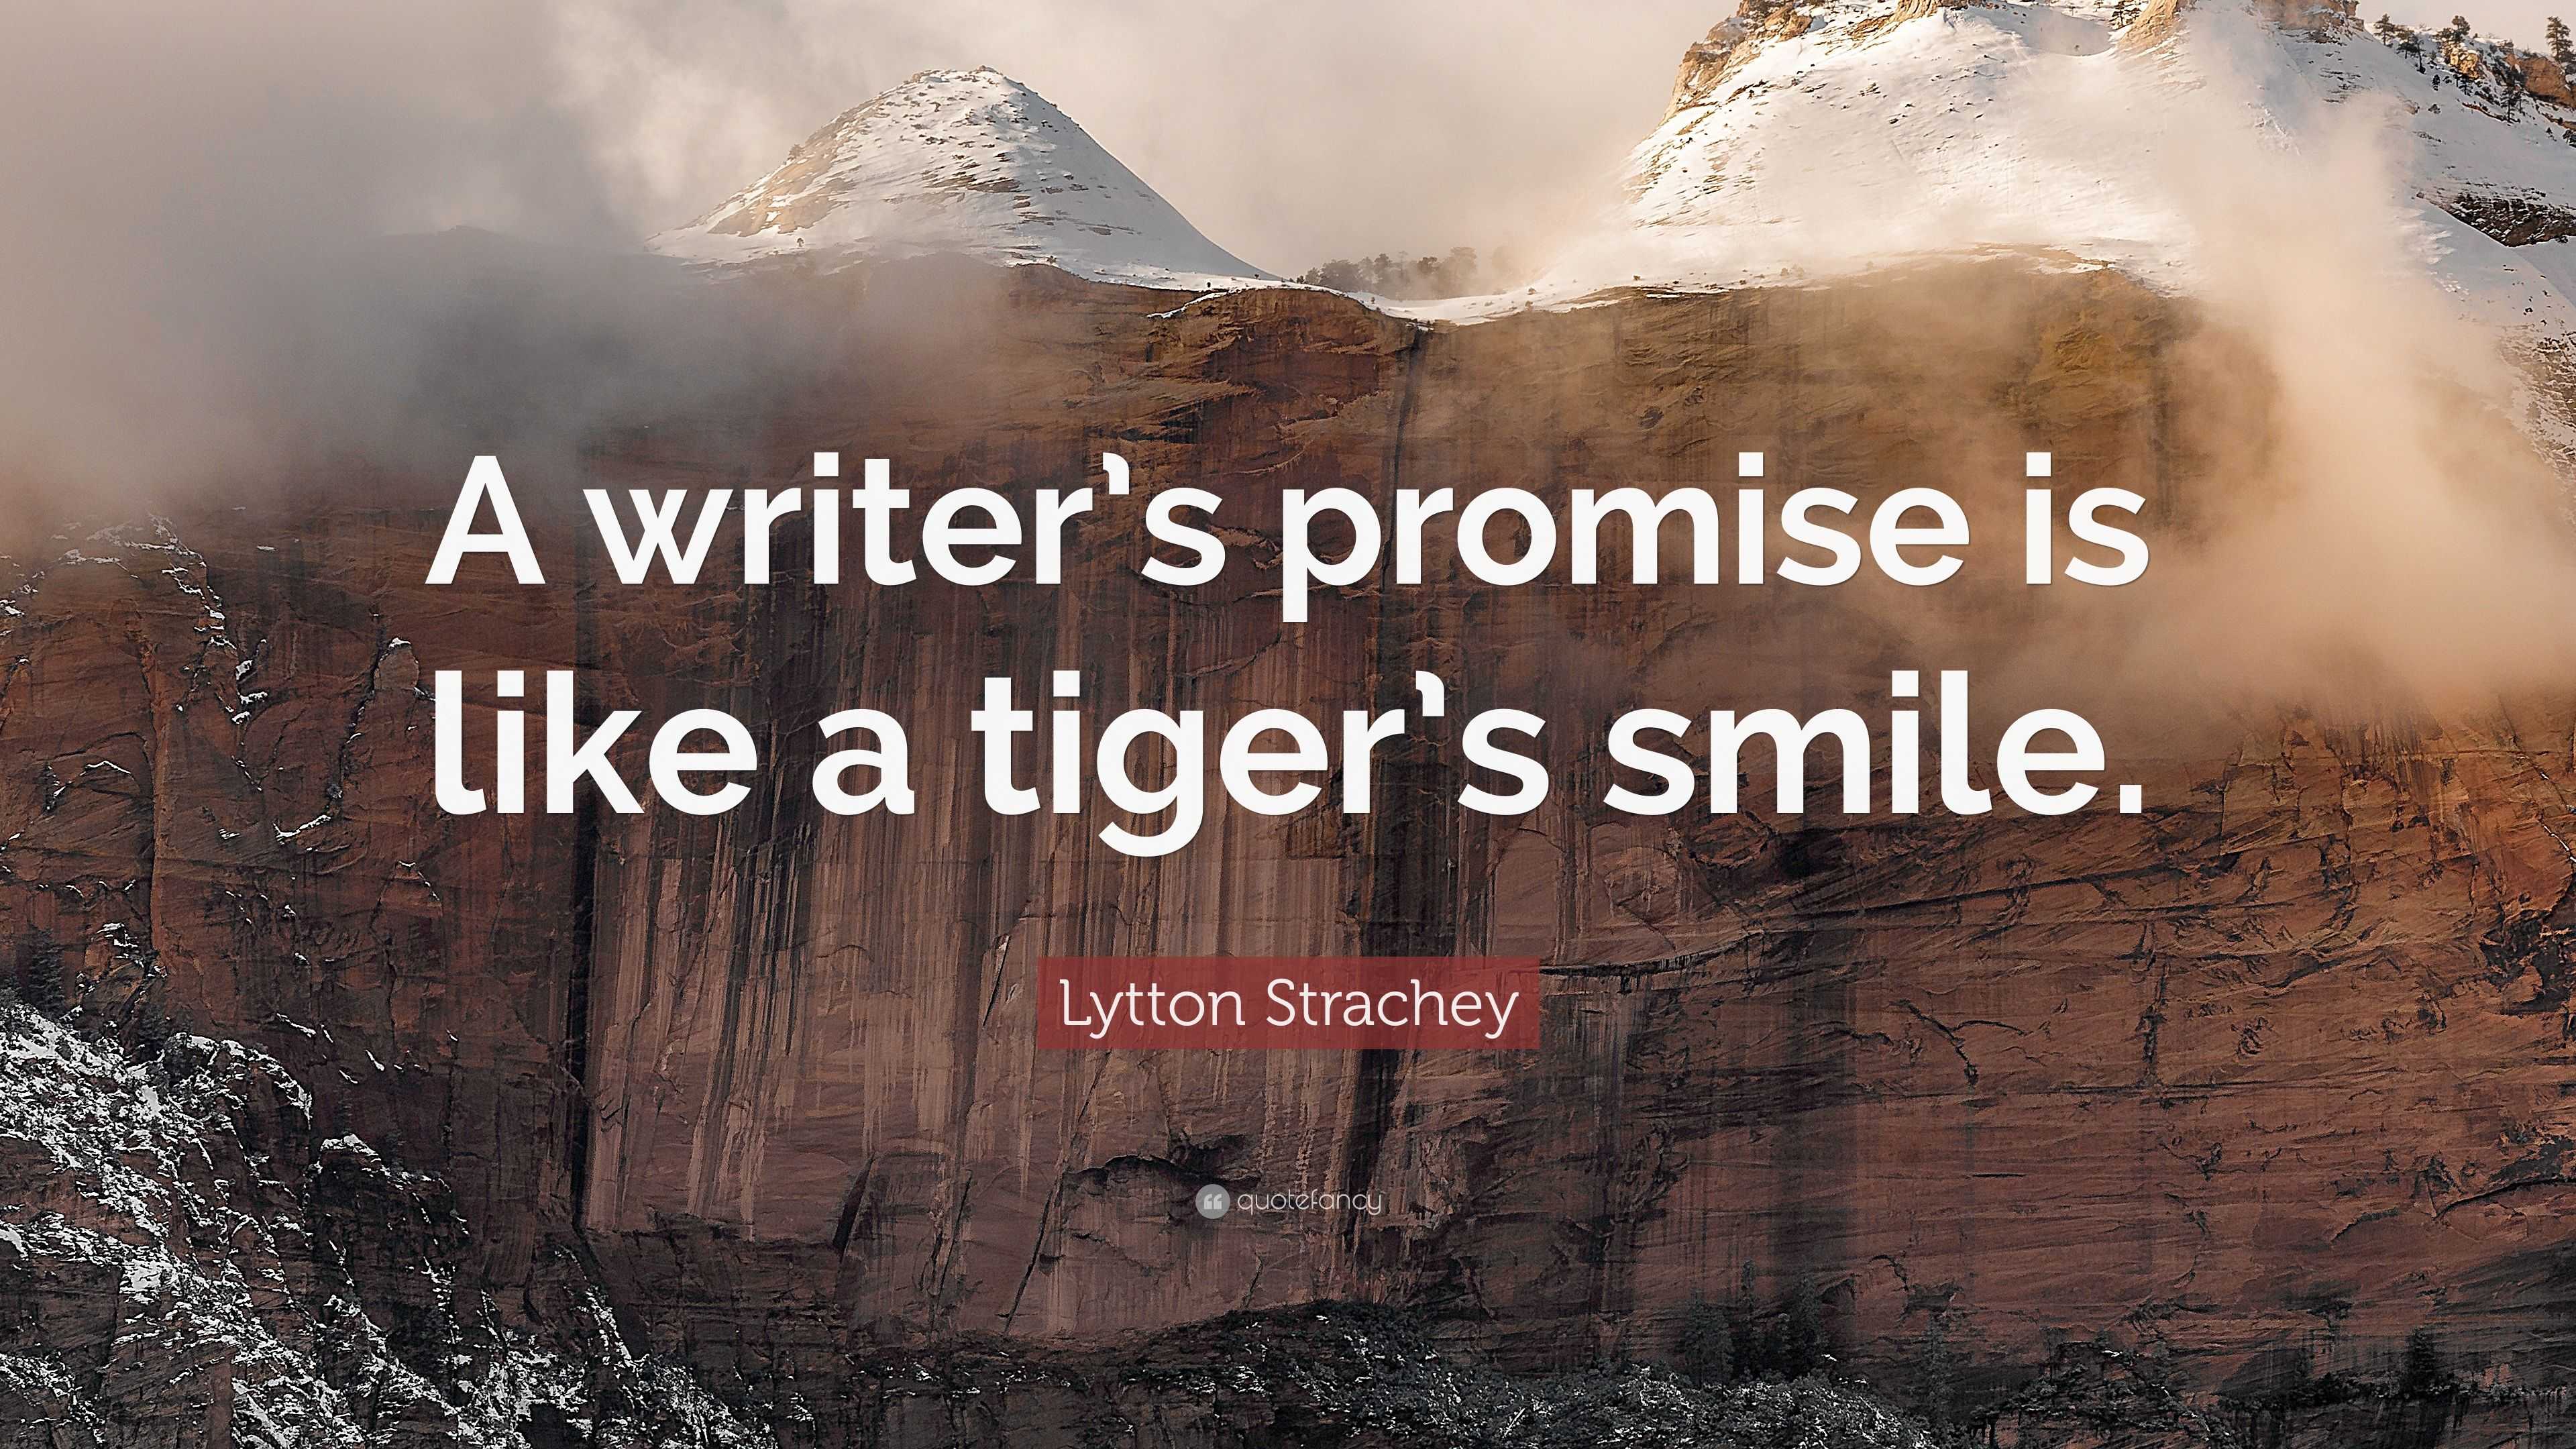 Lytton Strachey Quote: “A writer’s promise is like a tiger’s smile.”